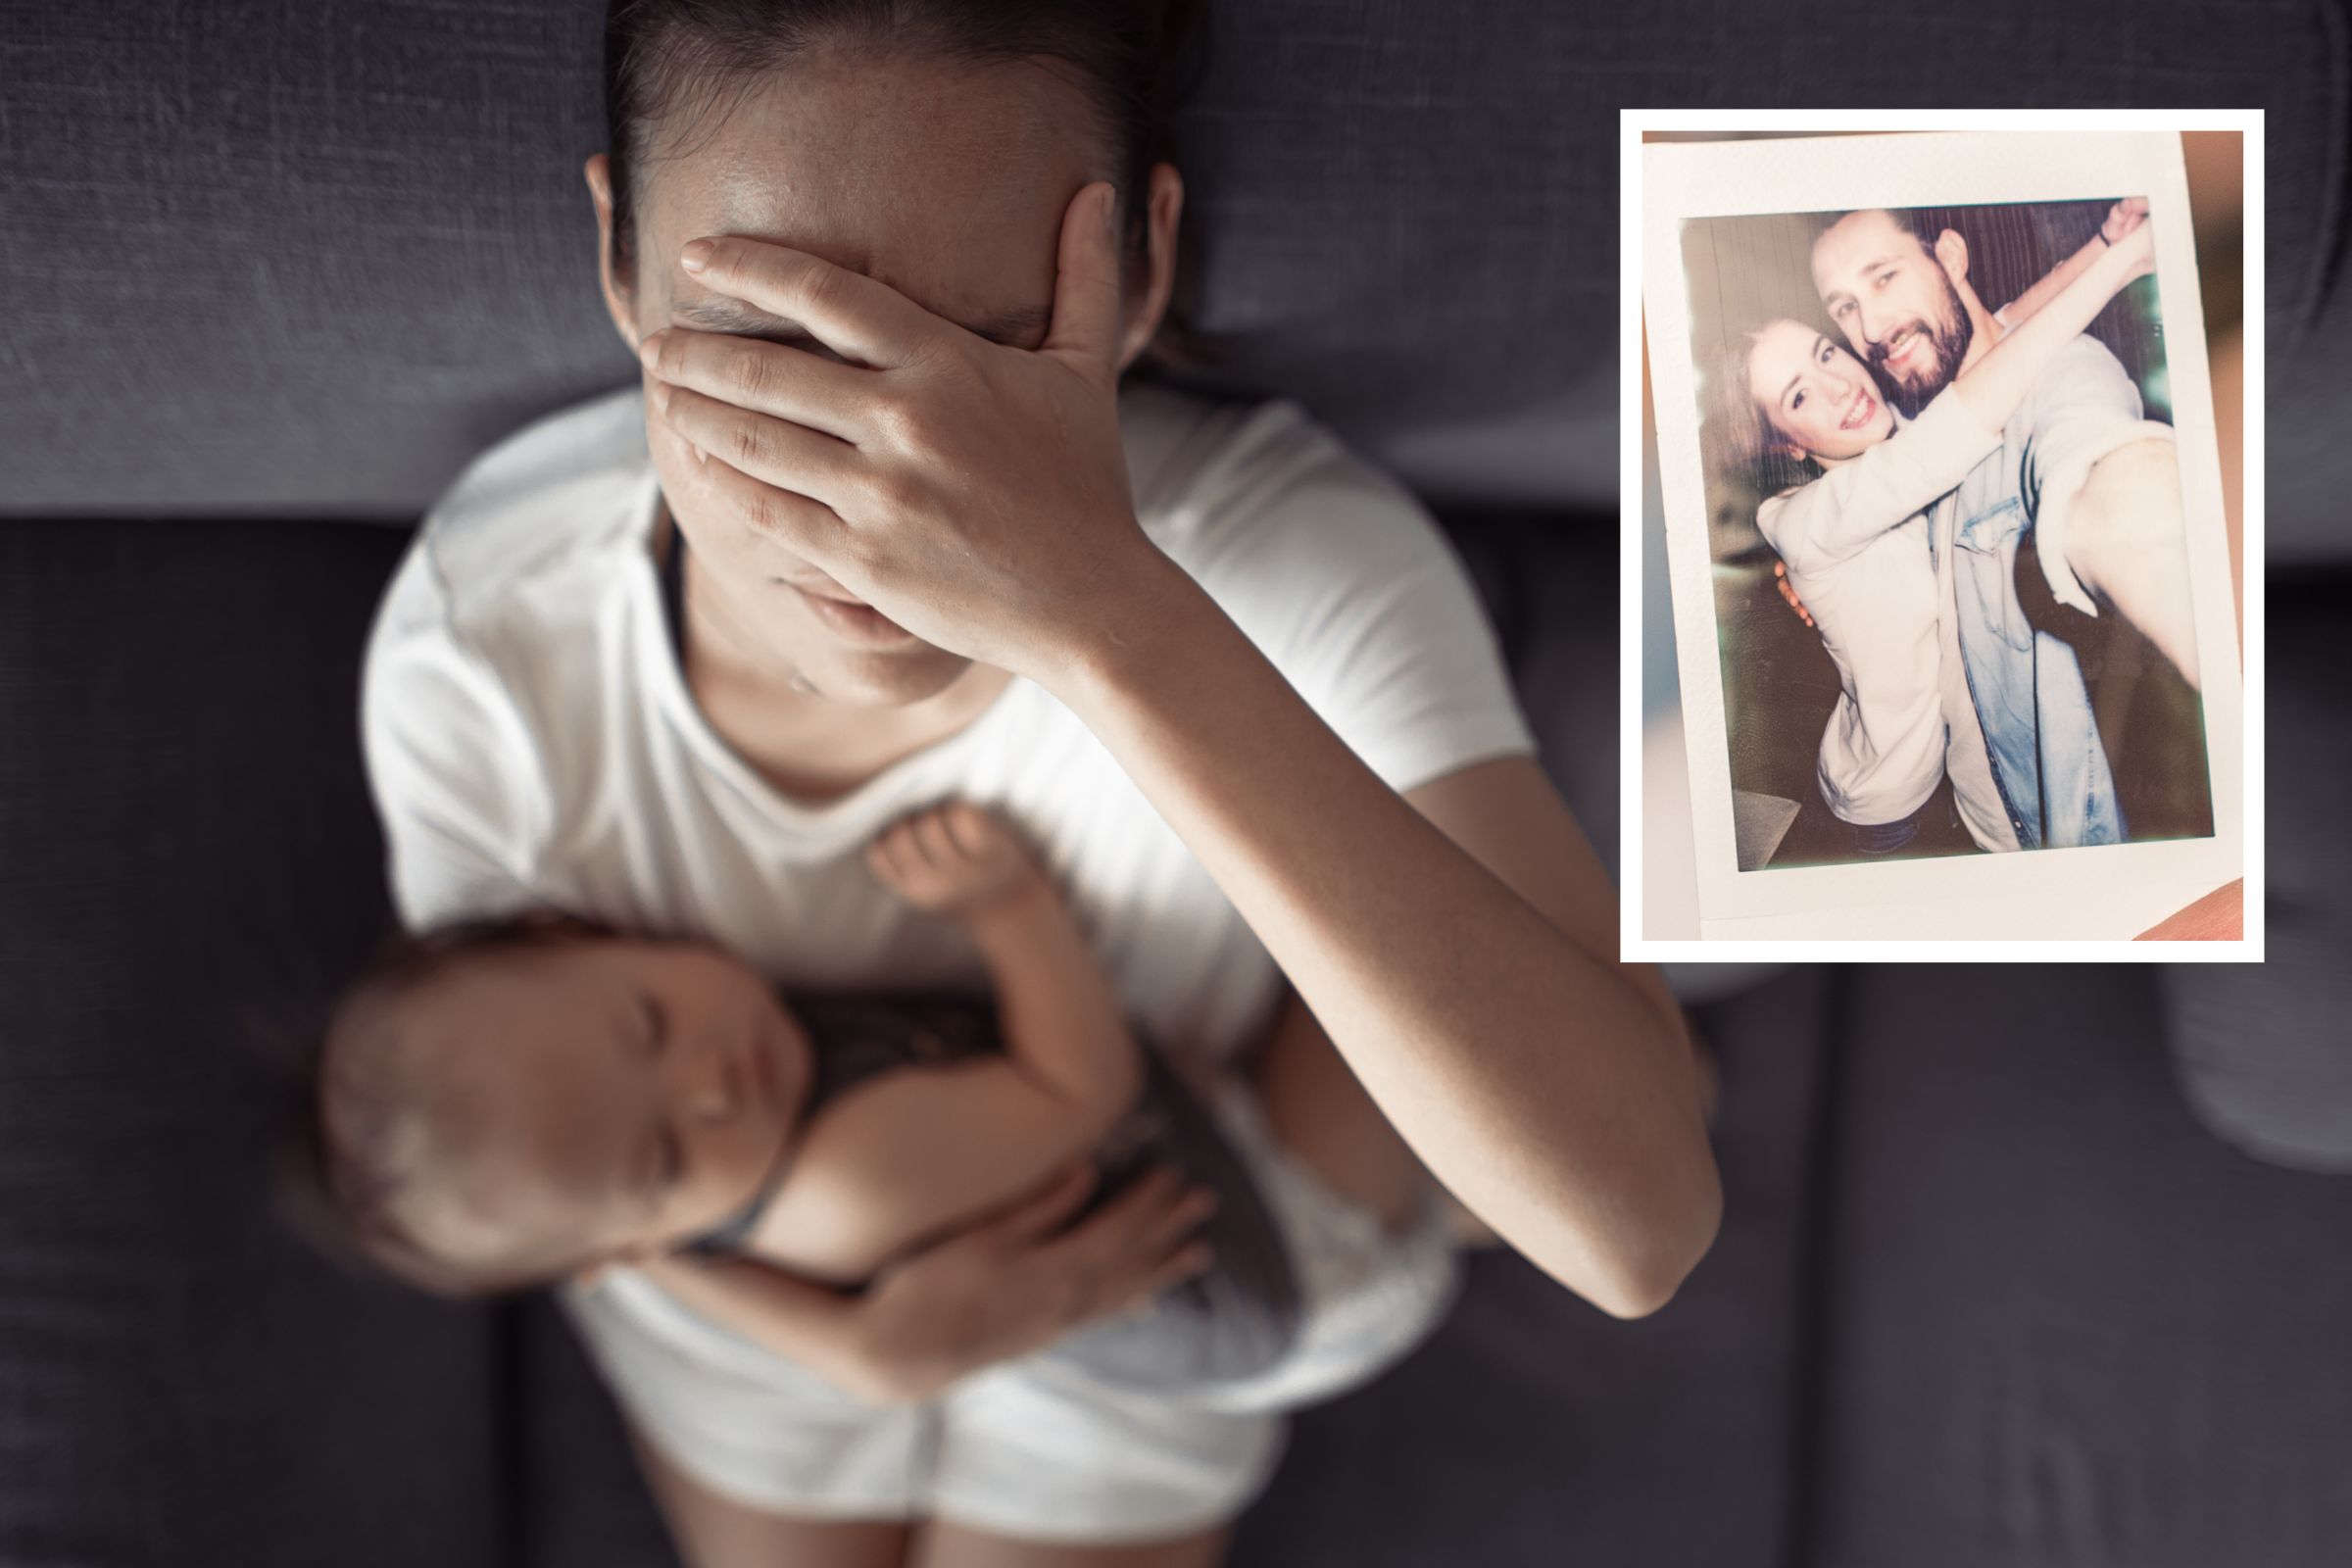 Devastated Wife Urged To Leave Husband After Finding Compromising Photo